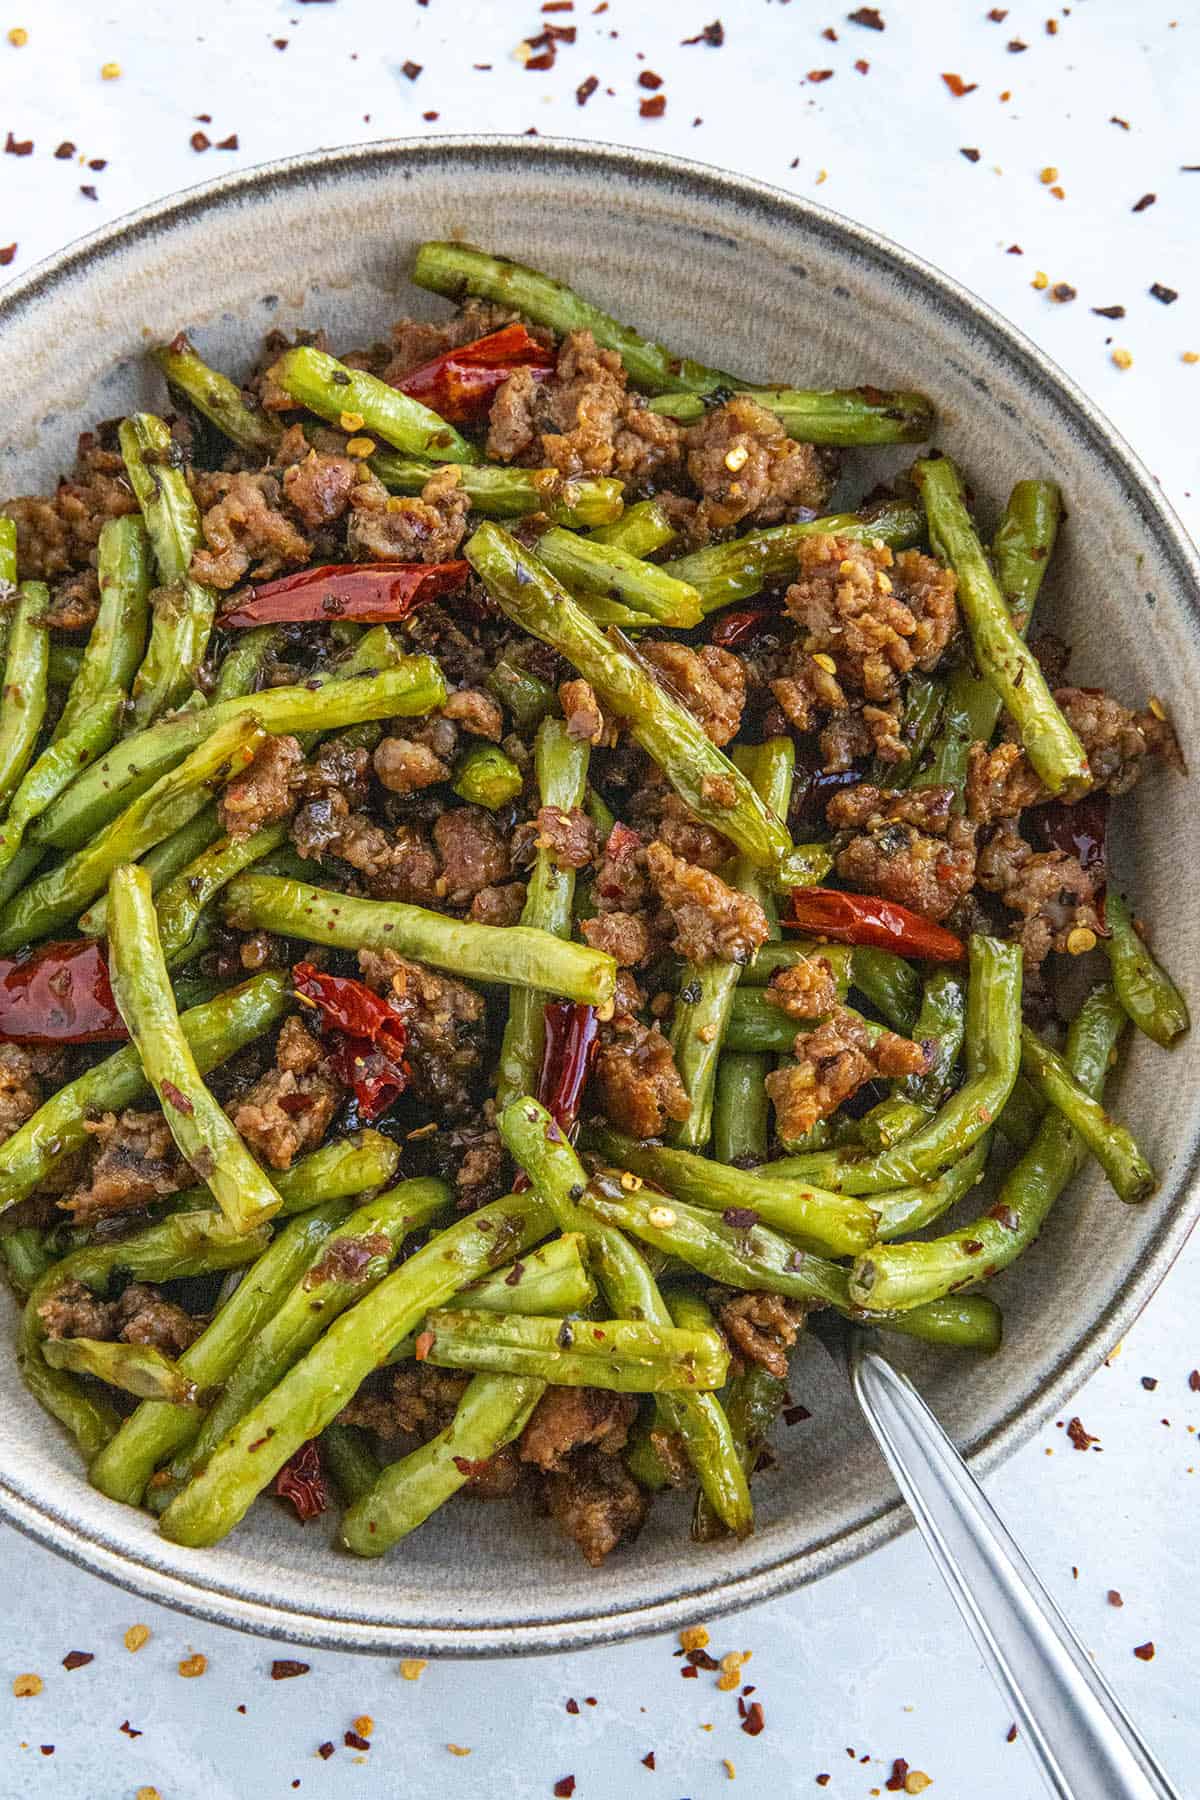 Sichuan Dry Fried Green Beans Recipe in a bowl